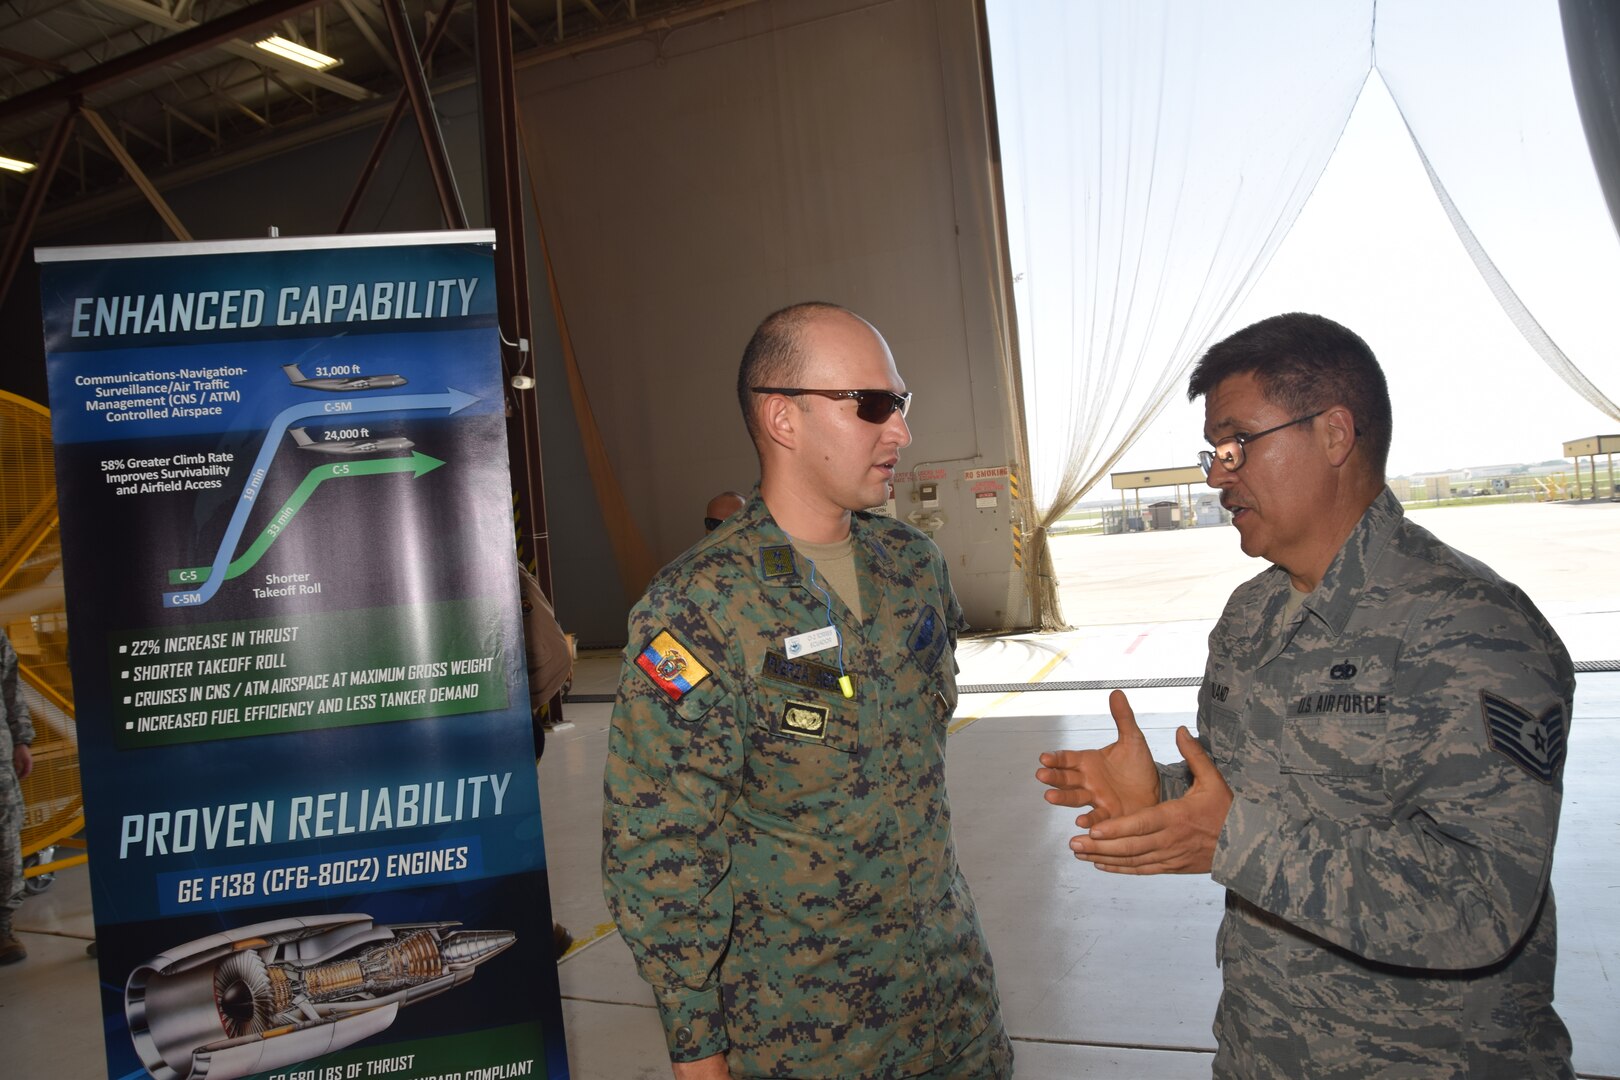 Tech. Sgt. William T. Holland, 433rd Maintenance Squadron jet engine mechanic, talks with 2nd Lt. Ivan Torres, an Ecuadorean Air Force maintenance officer, about the new GE CF6-80C2 turbofan engine the C-5M Super Galaxy aircraft uses July 18 at Joint Base San Antonio-Lackland. Inter-American Air Forces Academy students, like Torres, are from Latin American nations who study courses taught in Spanish in subjects ranging from professional military education, operations and support to aircraft and systems training.